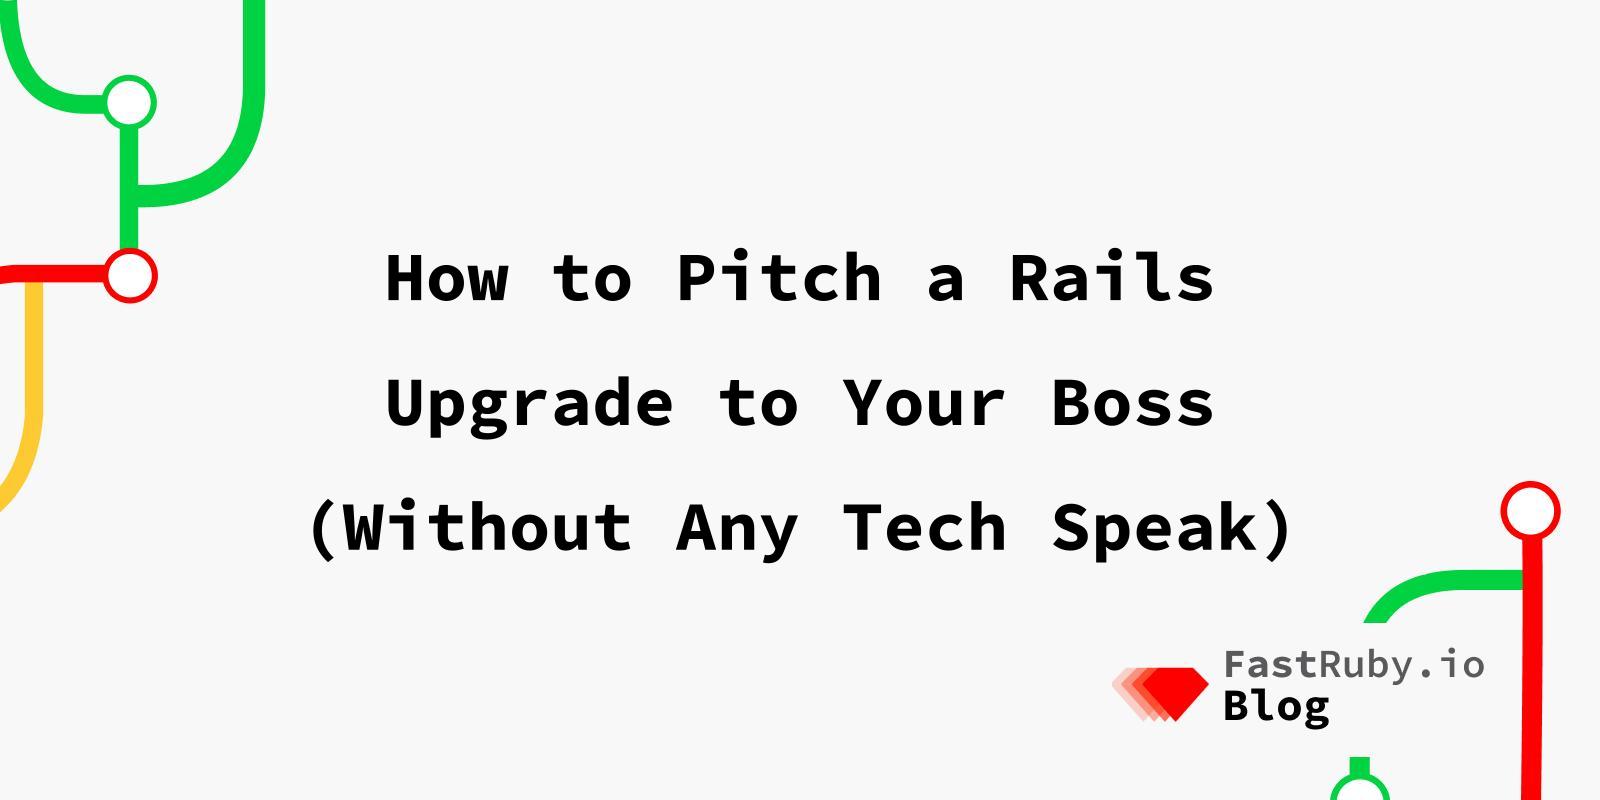 How to Pitch a Rails Upgrade to Your Boss (Without Any Tech Speak)